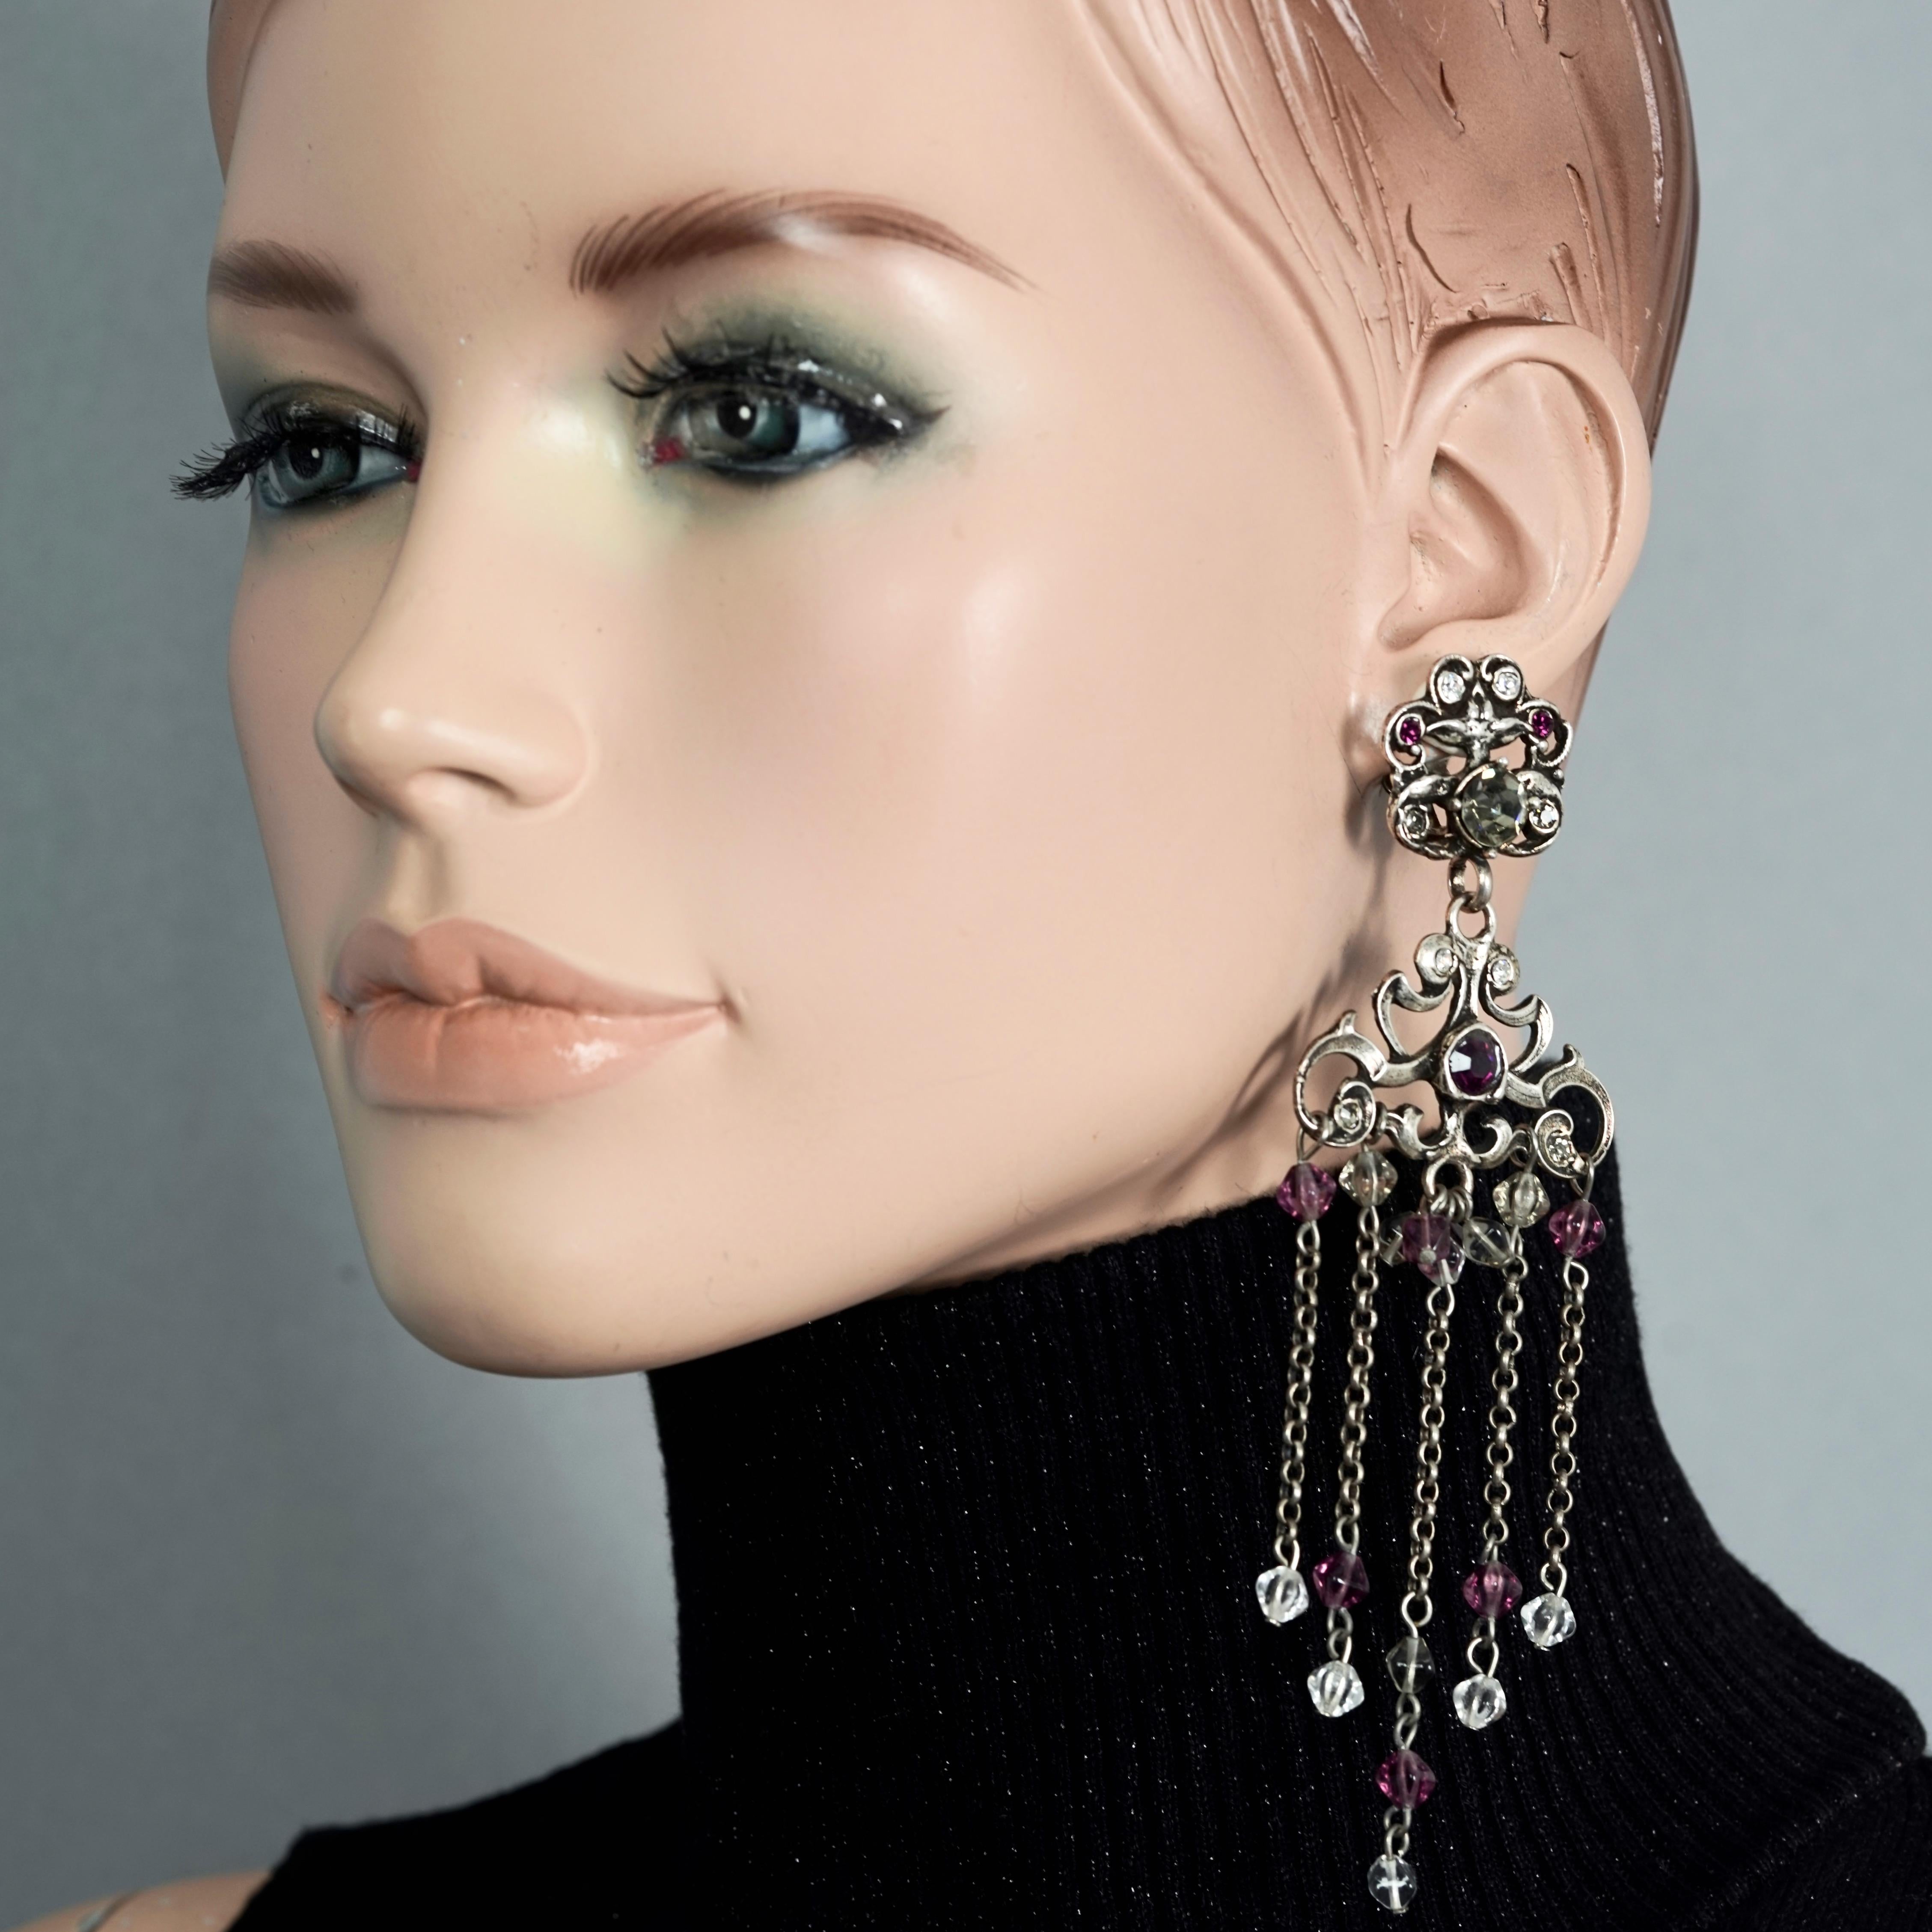 Vintage TON PASCAL Jewelled Baroque Cascading Chain Dangling Earrings

Measurements:
Height: 5.31 inches (13.5 cm)
Width: 1.69 inches (4.3 cm)
Weight per Earring: 20 grams

Features:
- 100% Authentic TON PASCAL.
- Dangling Baroque style earrings